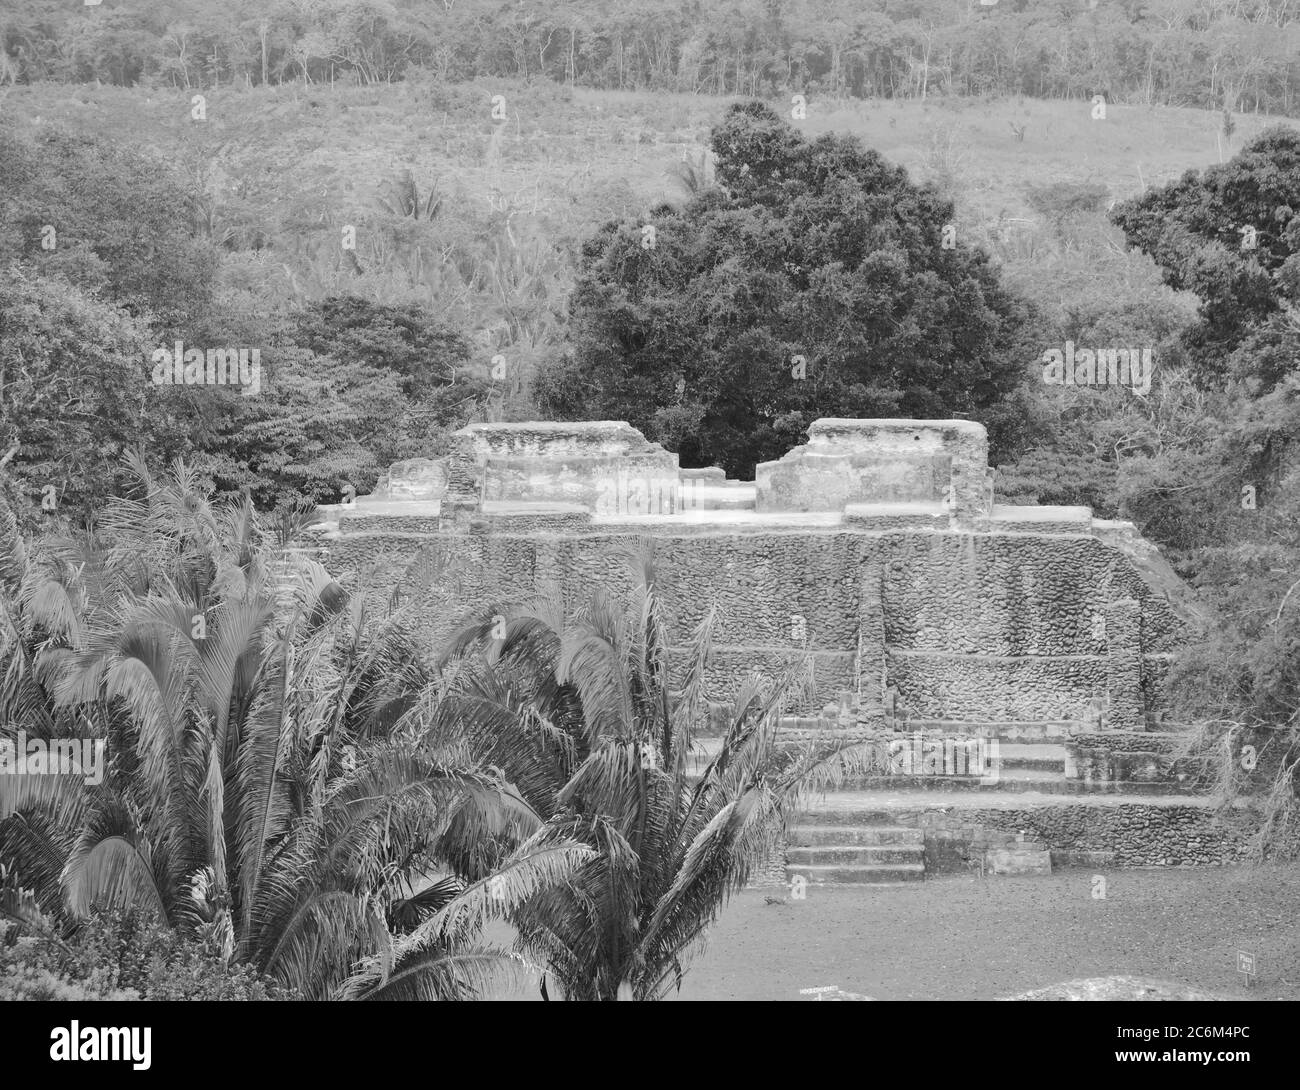 Historic ancient city ruins of Xunantunich Archaeological Reserve in Belize. Black and White Stock Photo